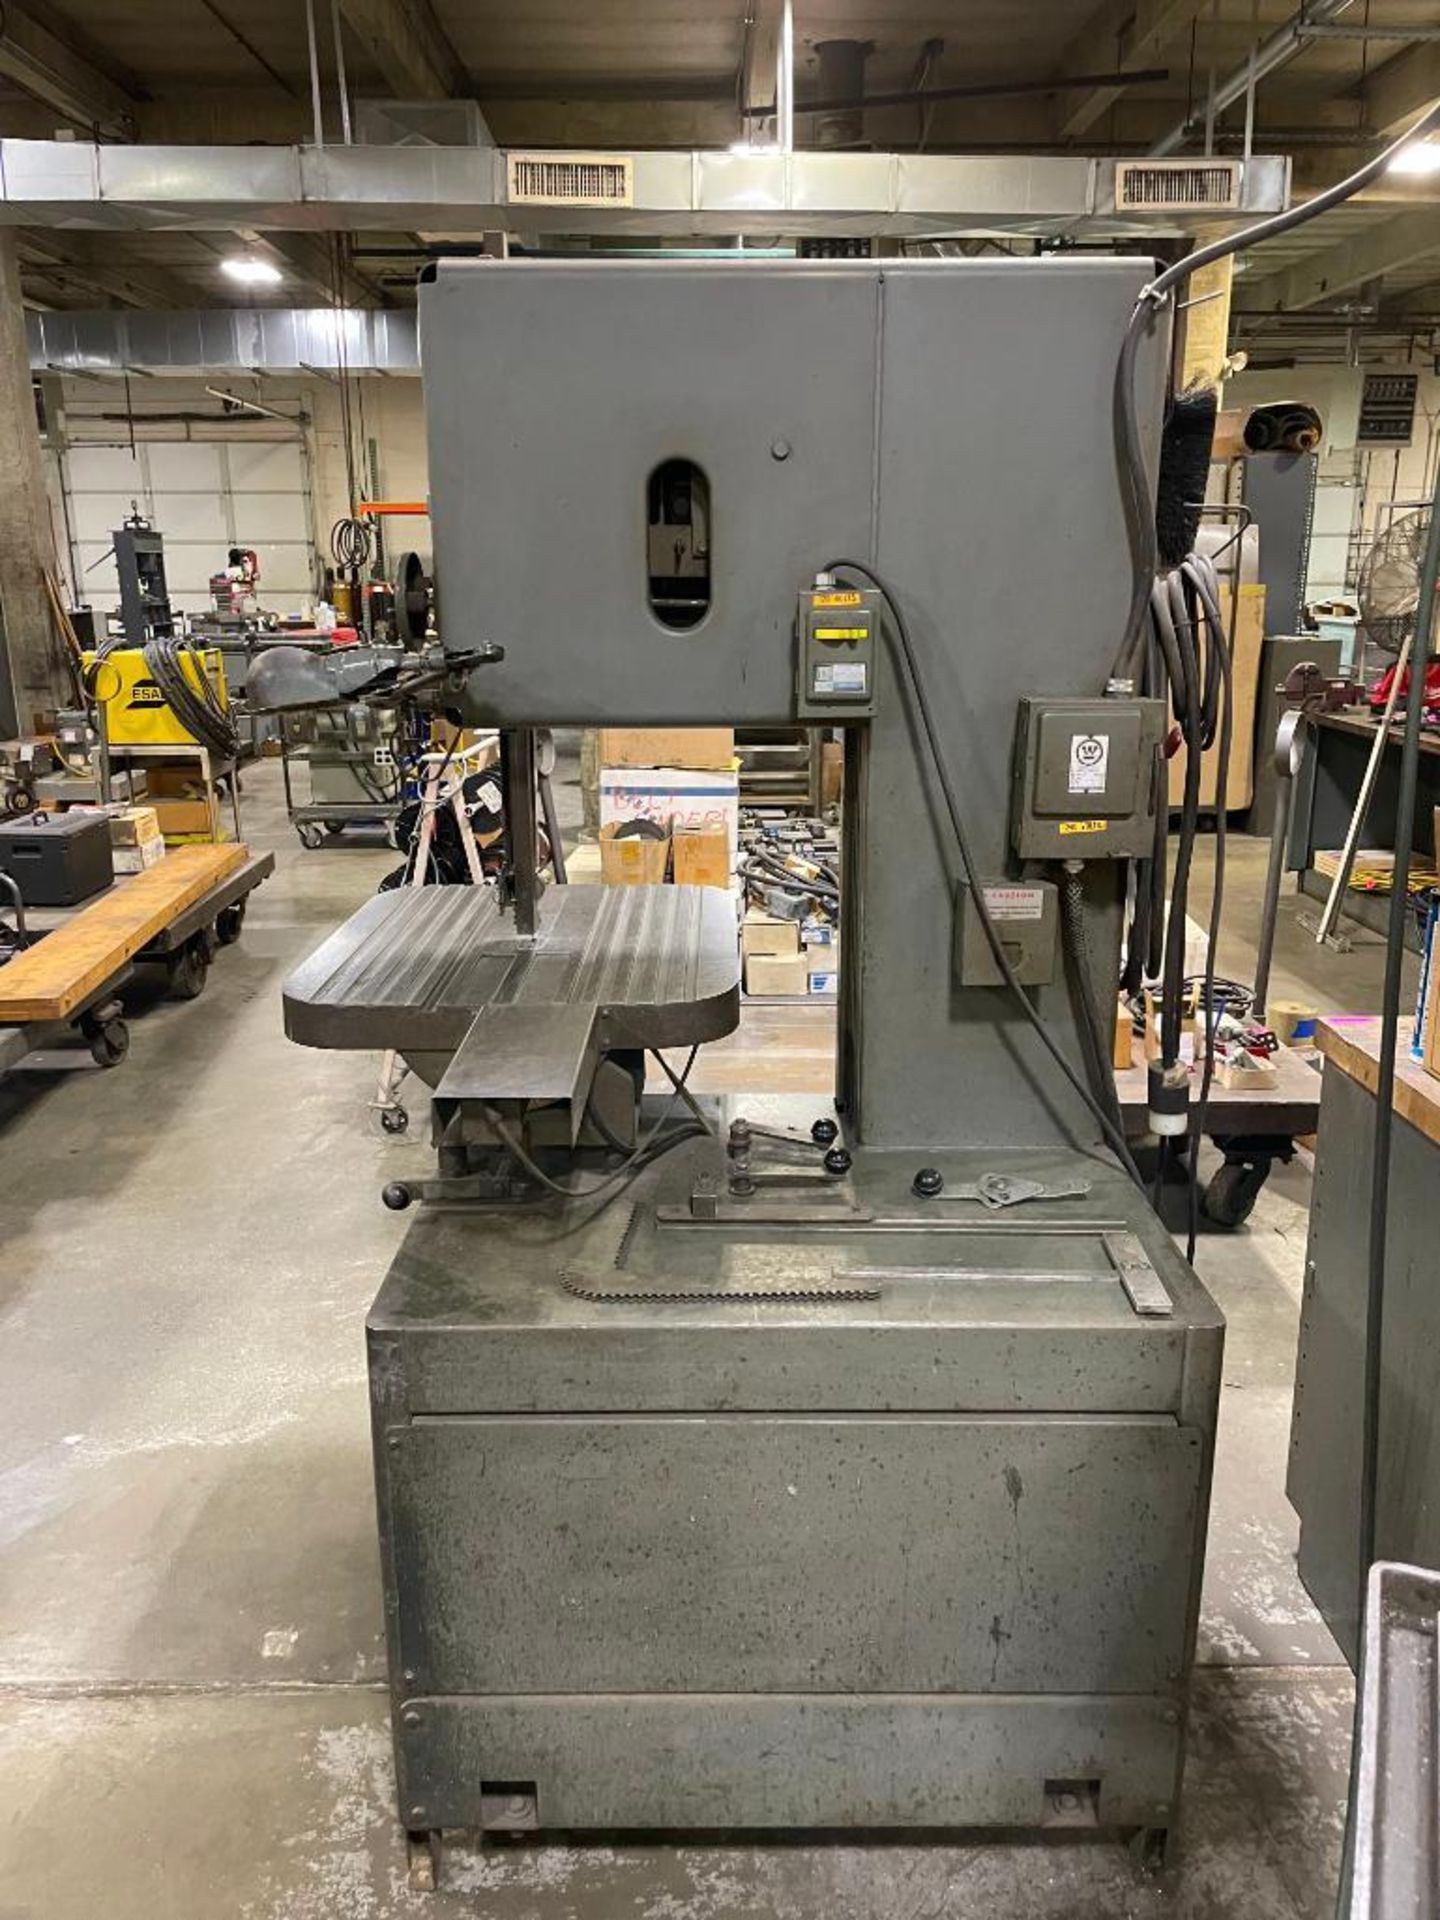 1969 GROB 4V-18 VERTICAL BAND SAW INFORMATION: 230V, 1 PHASE SIZE: 18"' LOCATION: WAREHOUSE QTY: 1 - Image 5 of 15